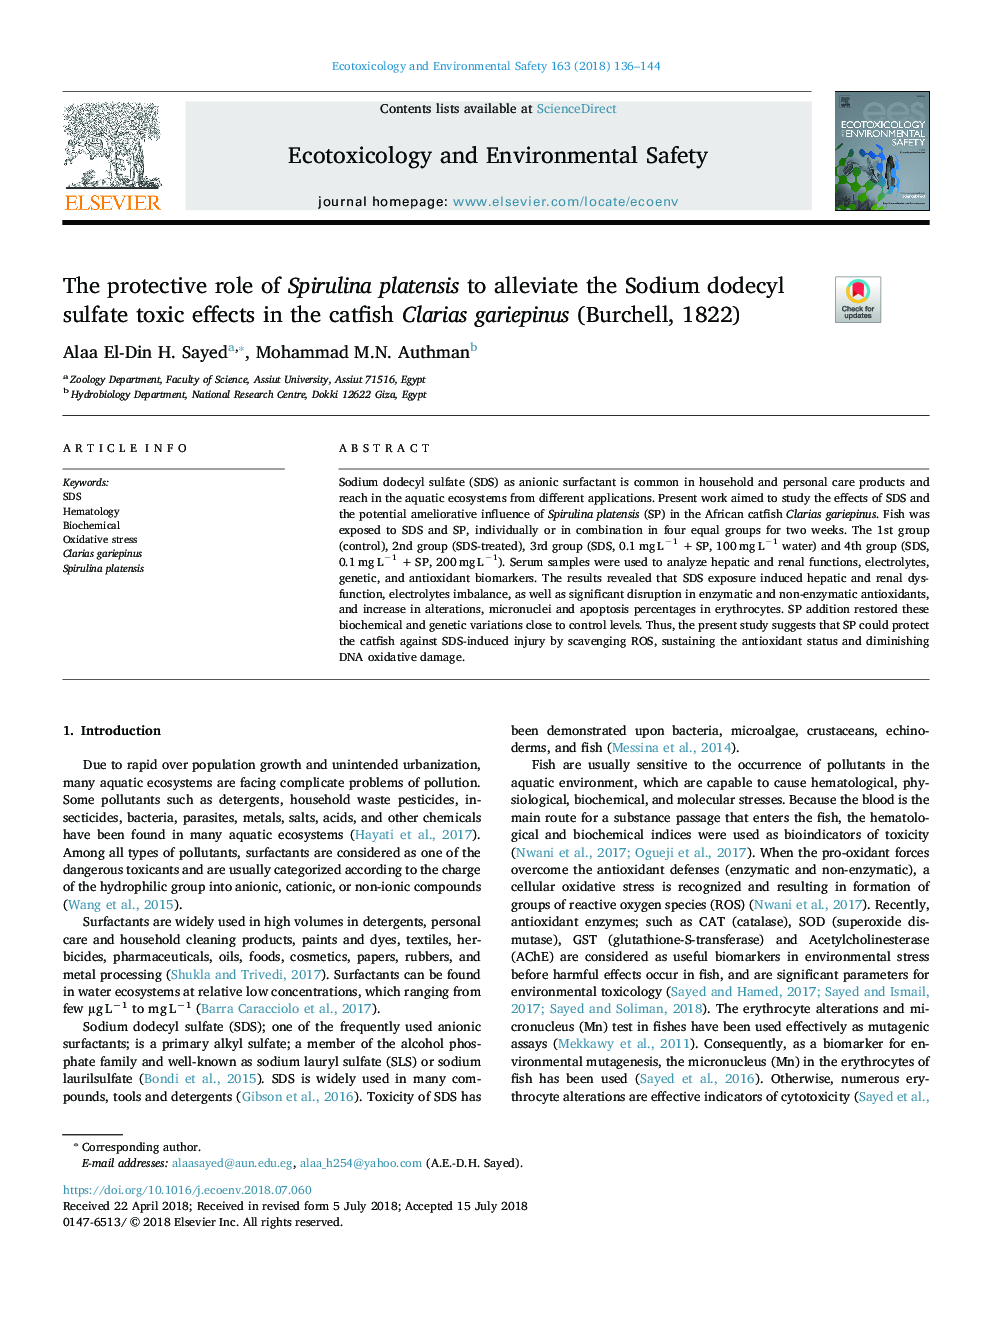 The protective role of Spirulina platensis to alleviate the Sodium dodecyl sulfate toxic effects in the catfish Clarias gariepinus (Burchell, 1822)